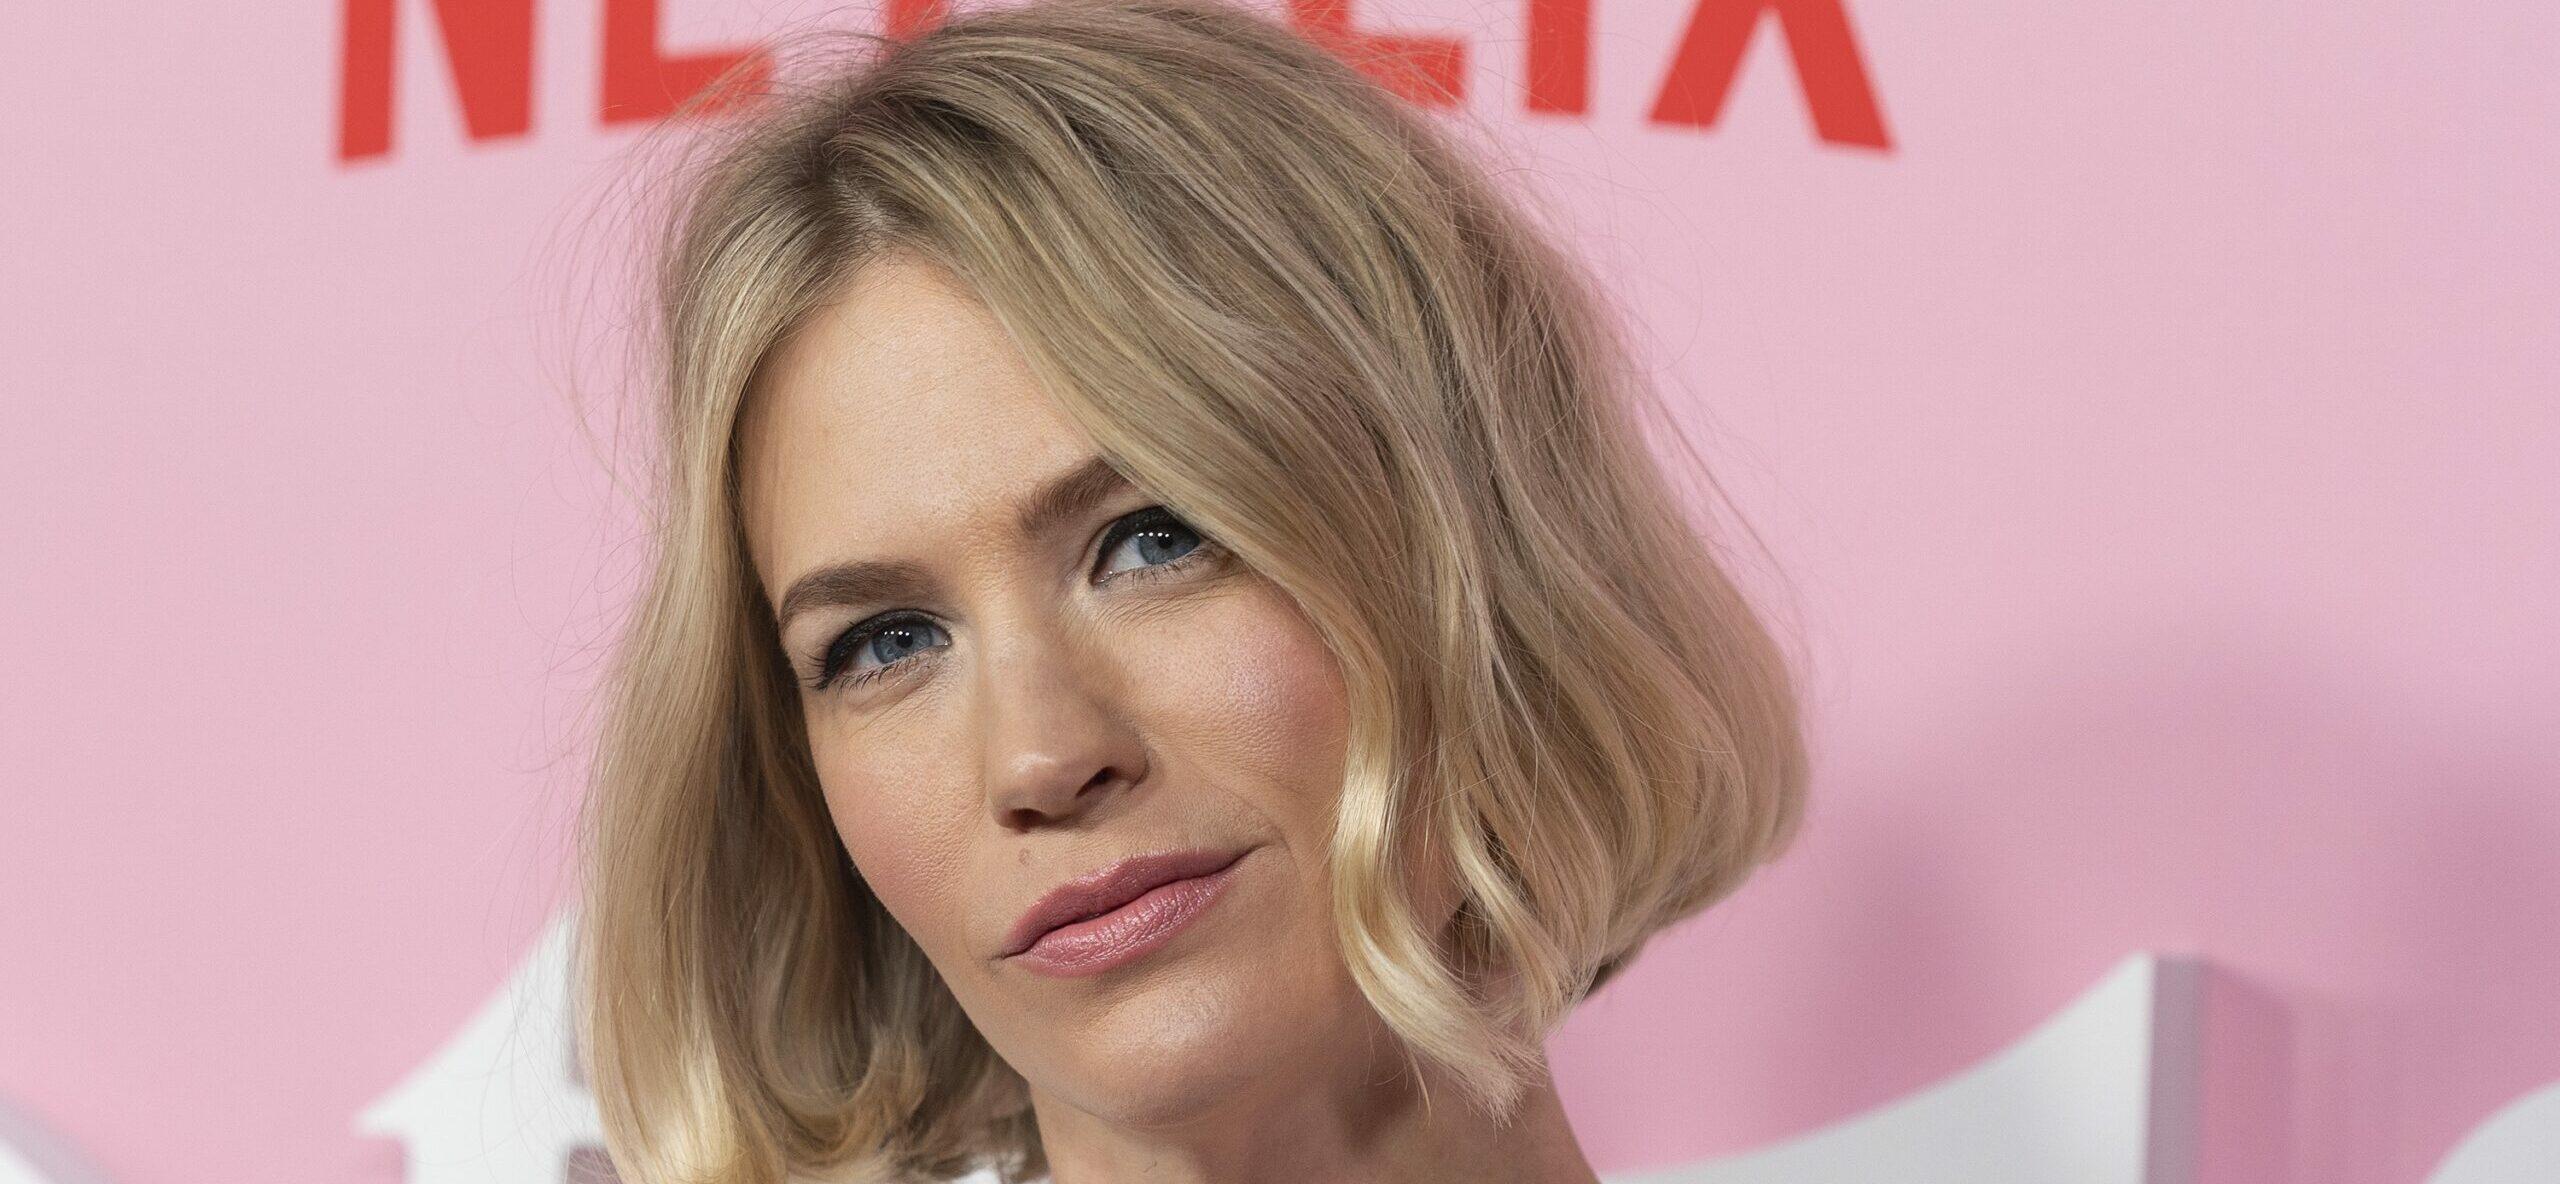 January Jones Jokes About Getting Some Of Paul Rudd’s Blood After His Youthful Look Goes Viral